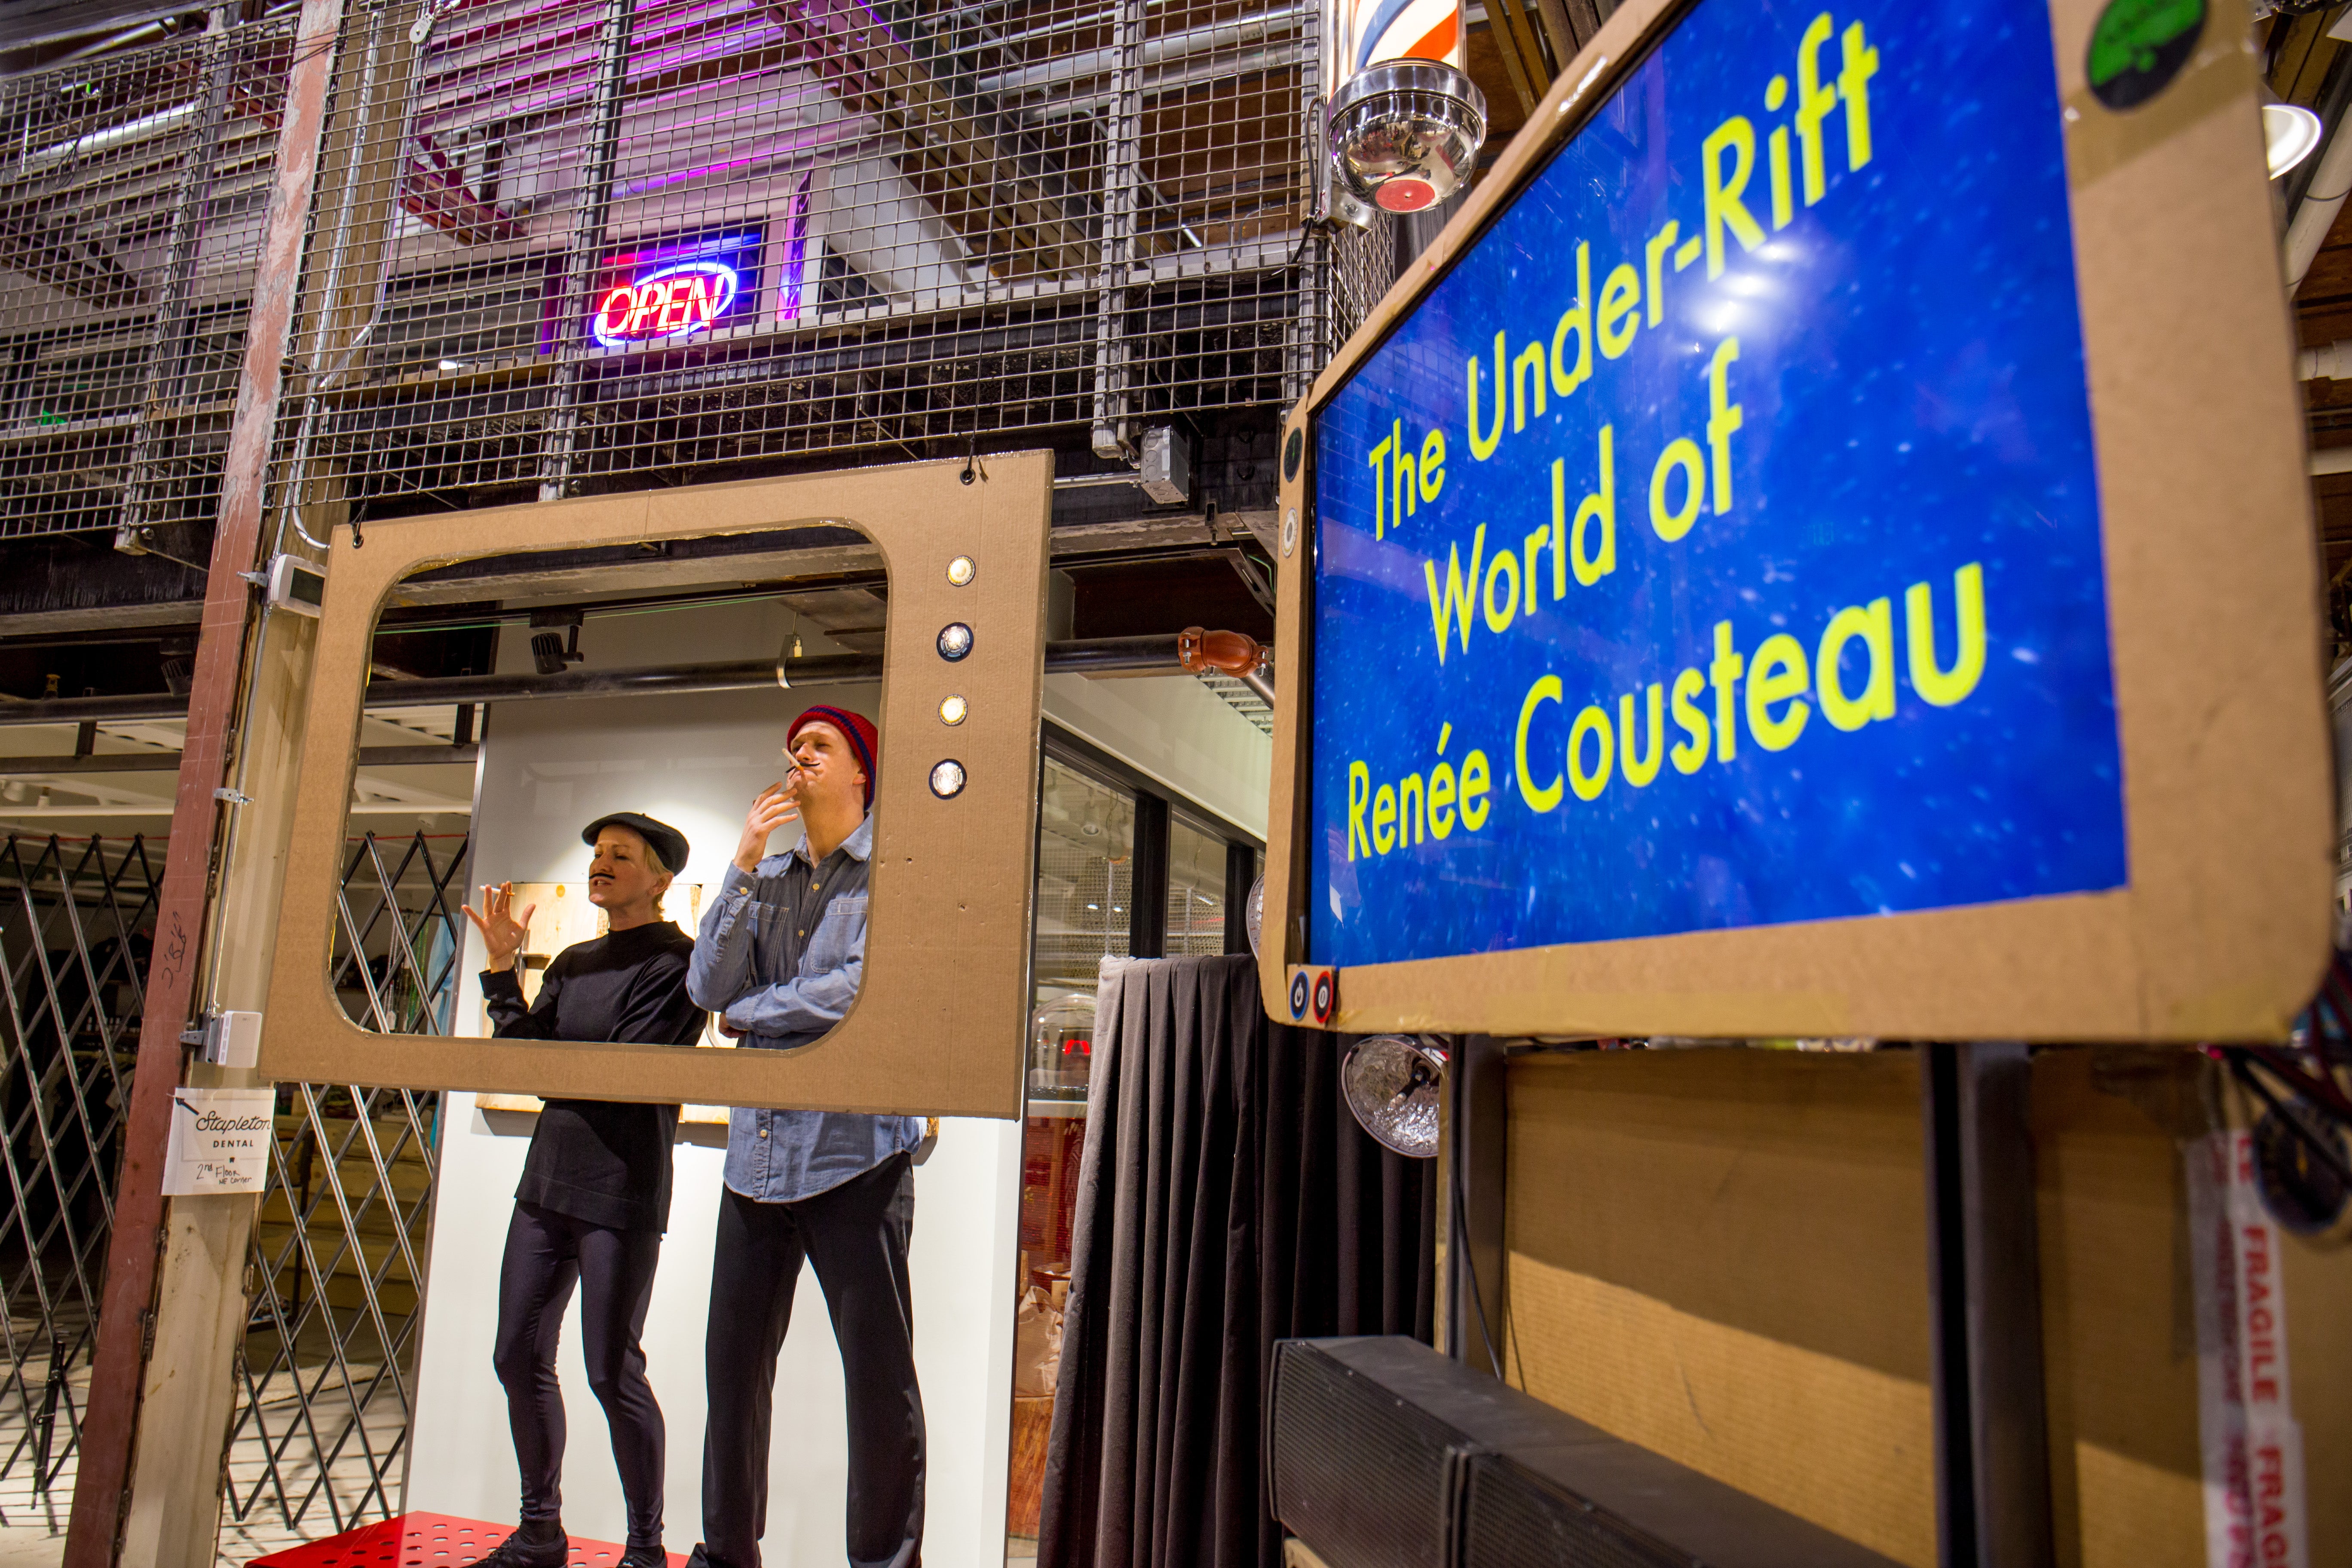 Two men stand behind a cardboard frame in front of a sign reading "The Under-Rift World of Renee Cousteau".